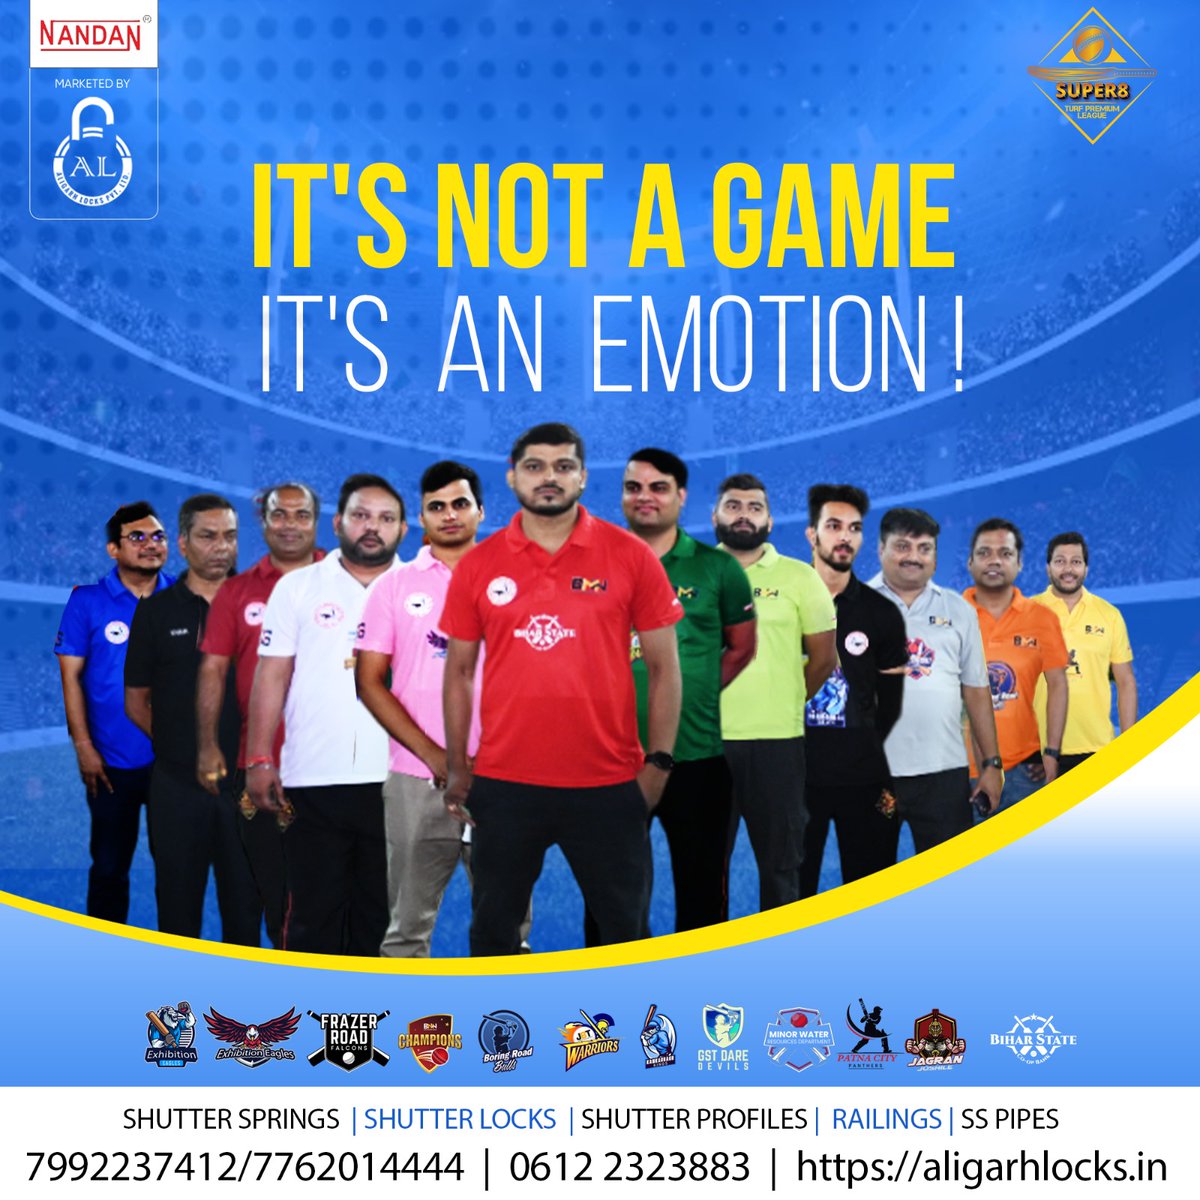 It’s not just a game, it’s a rollercoaster of emotions!

Witness the ultimate cricketing extravaganza!
.
.
.
#cricket #boxcricket #turfarena #NandanKaBharosha #boxcricketleague #NandanKaBharosha